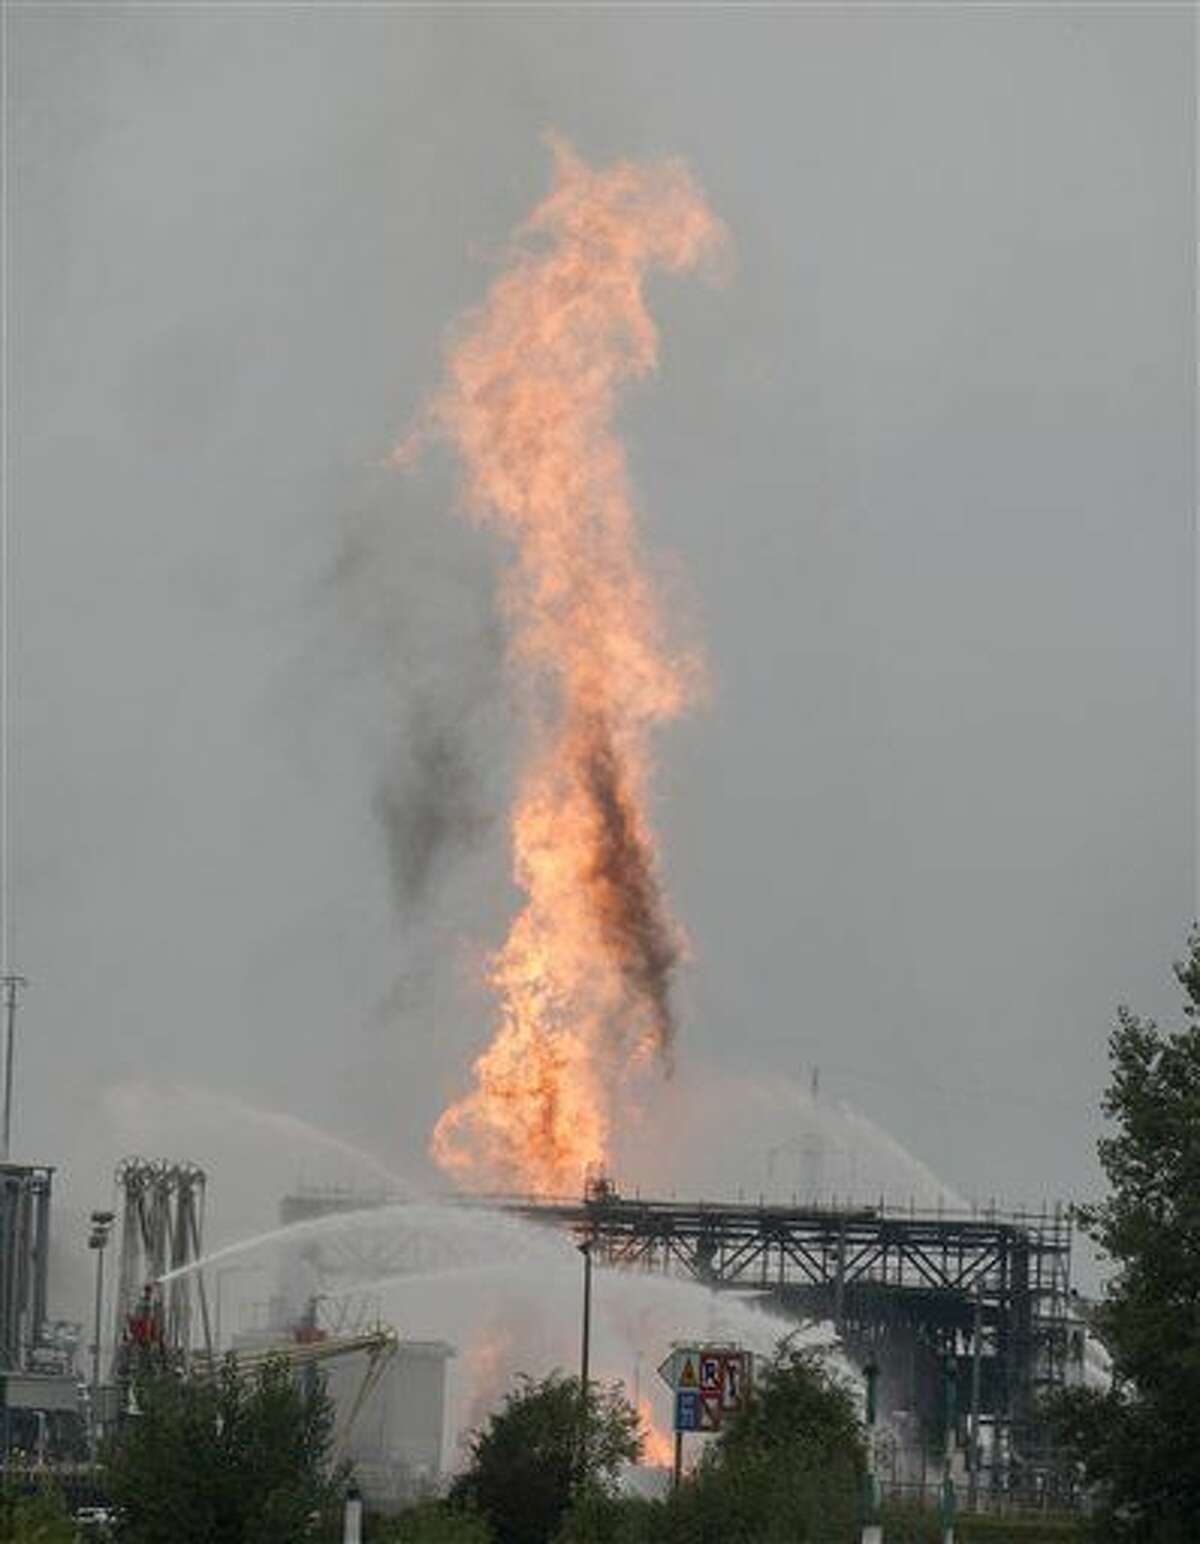 Firefighters extinguish flames during a fire at BASF chemical plant in Ludwigshafen, Germany, Monday Oct. 17, 2016. The company said that several people were injured in a late-morning explosion. (Frank Rumpenhorst/dpa via AP)